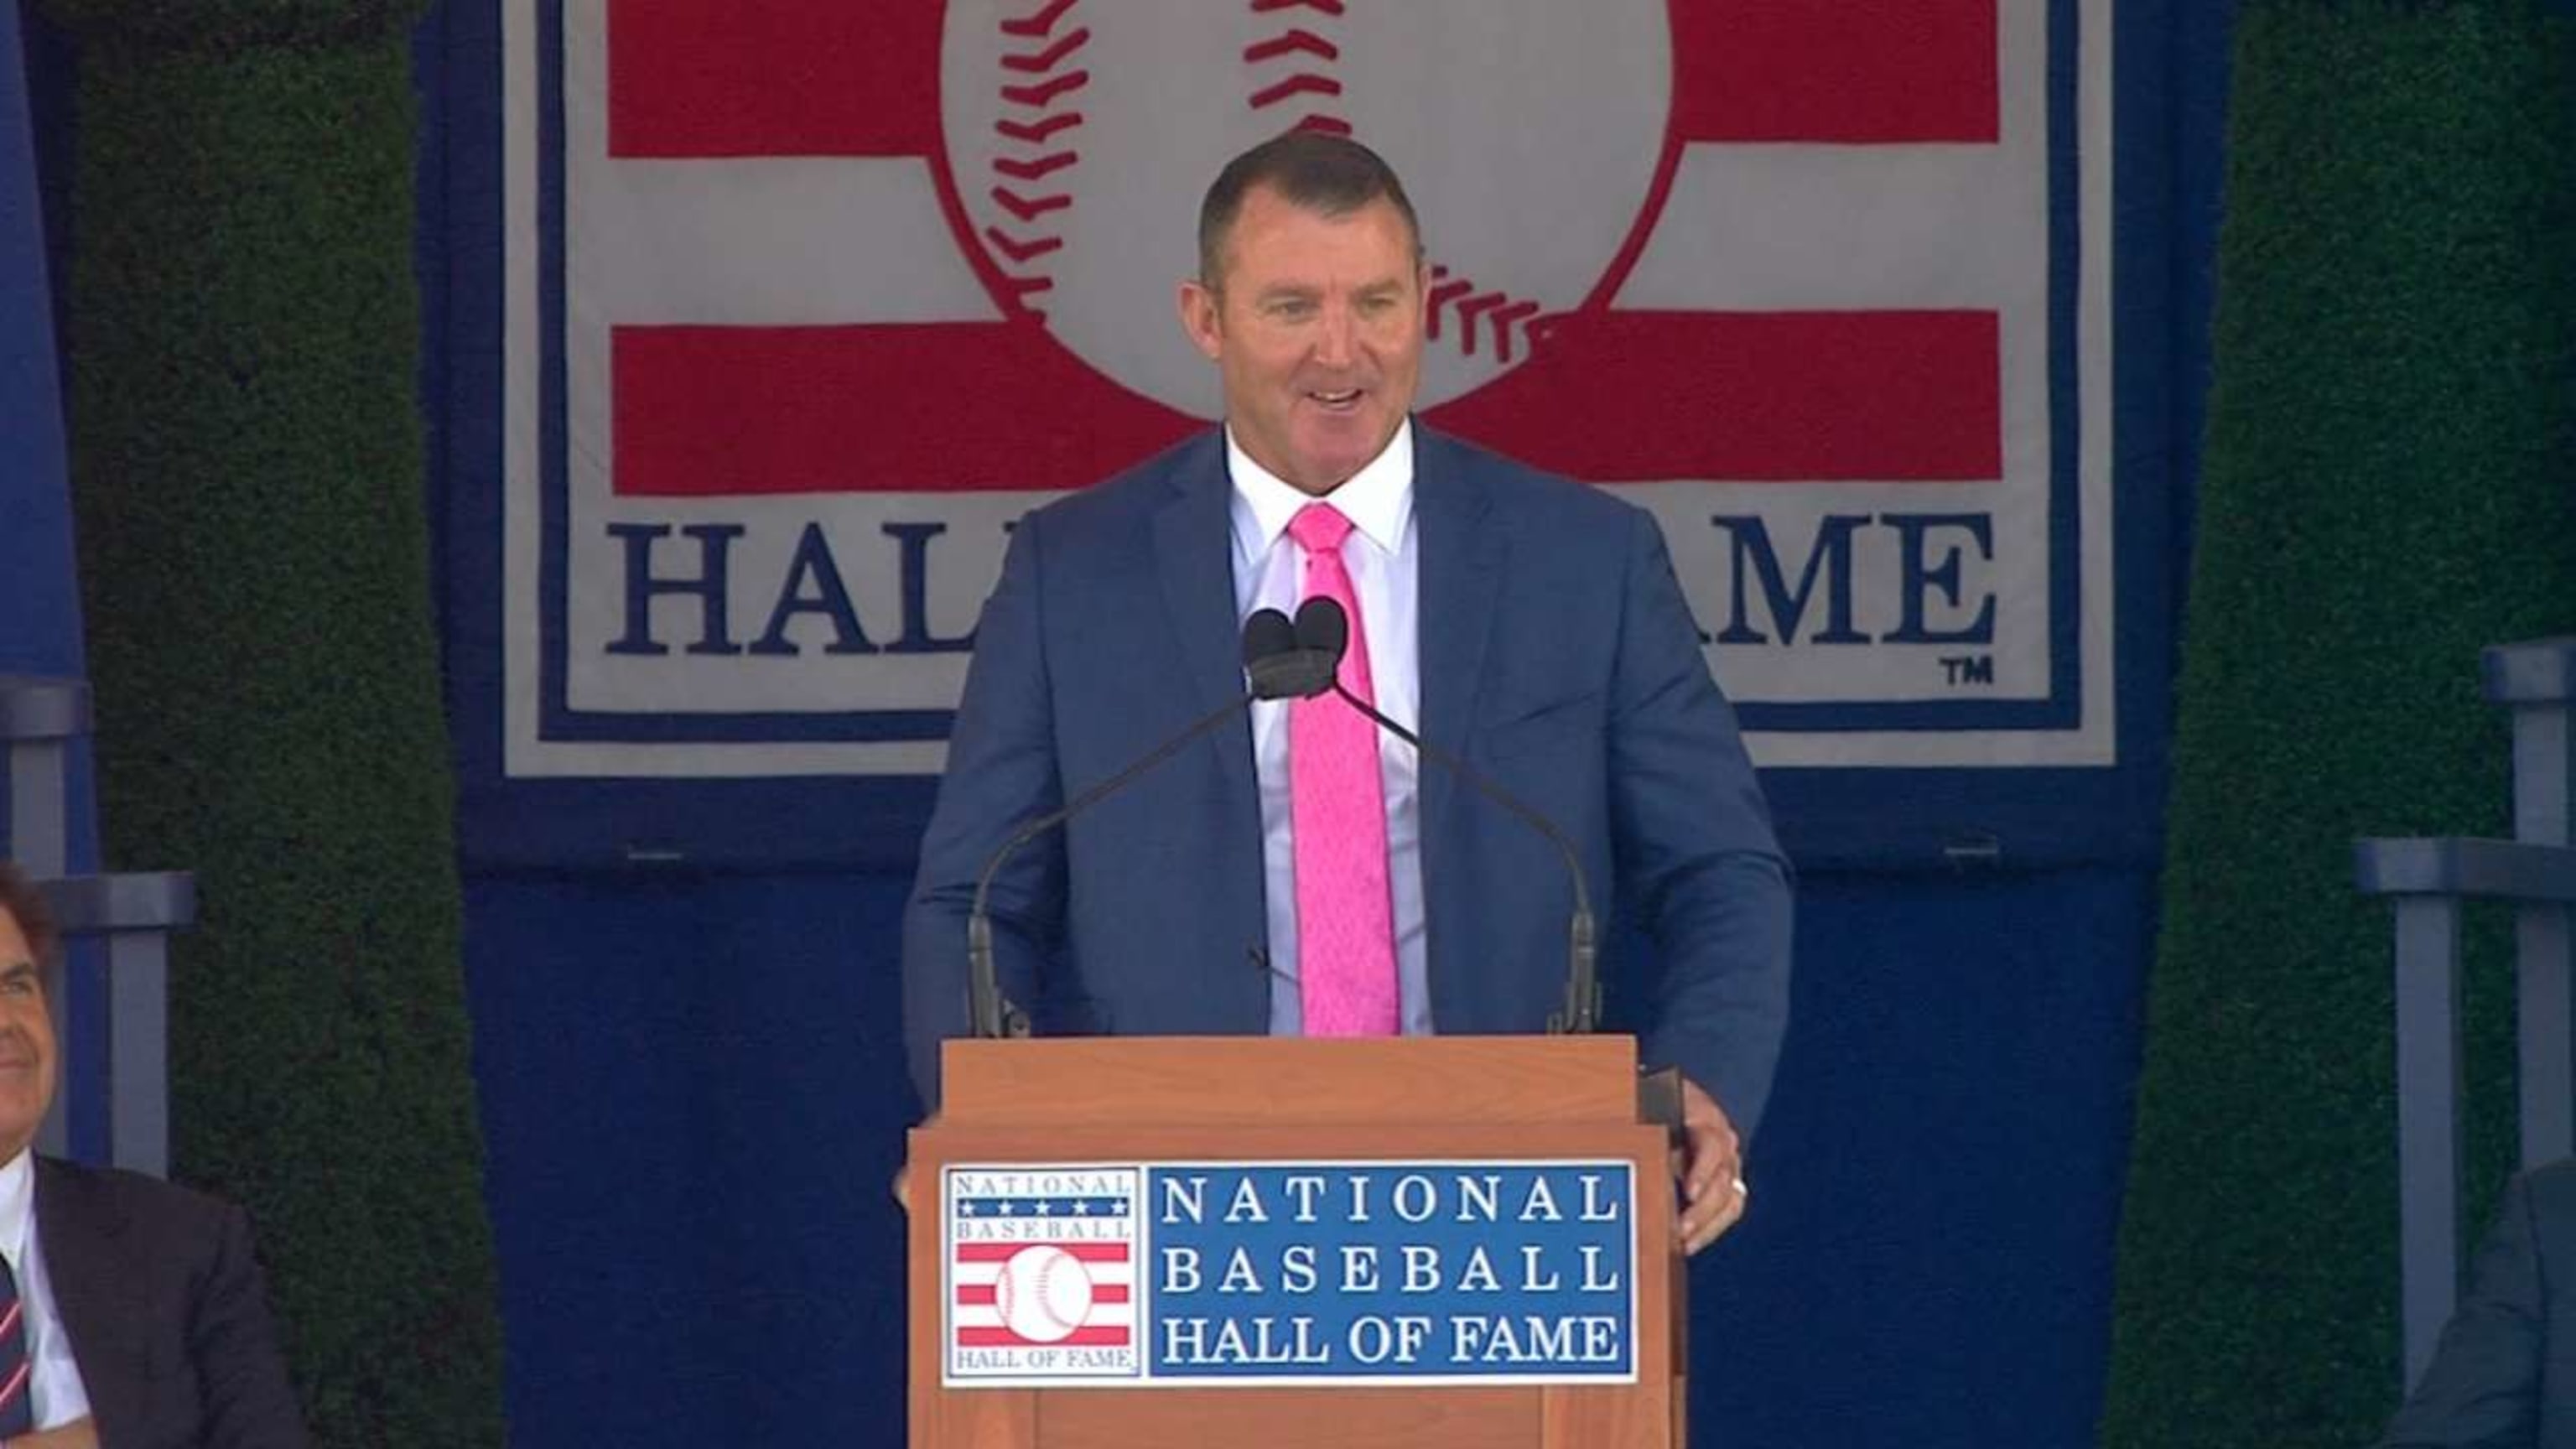 Andrea Thome reflects on Jim Thome's career and call to the Baseball HOF 